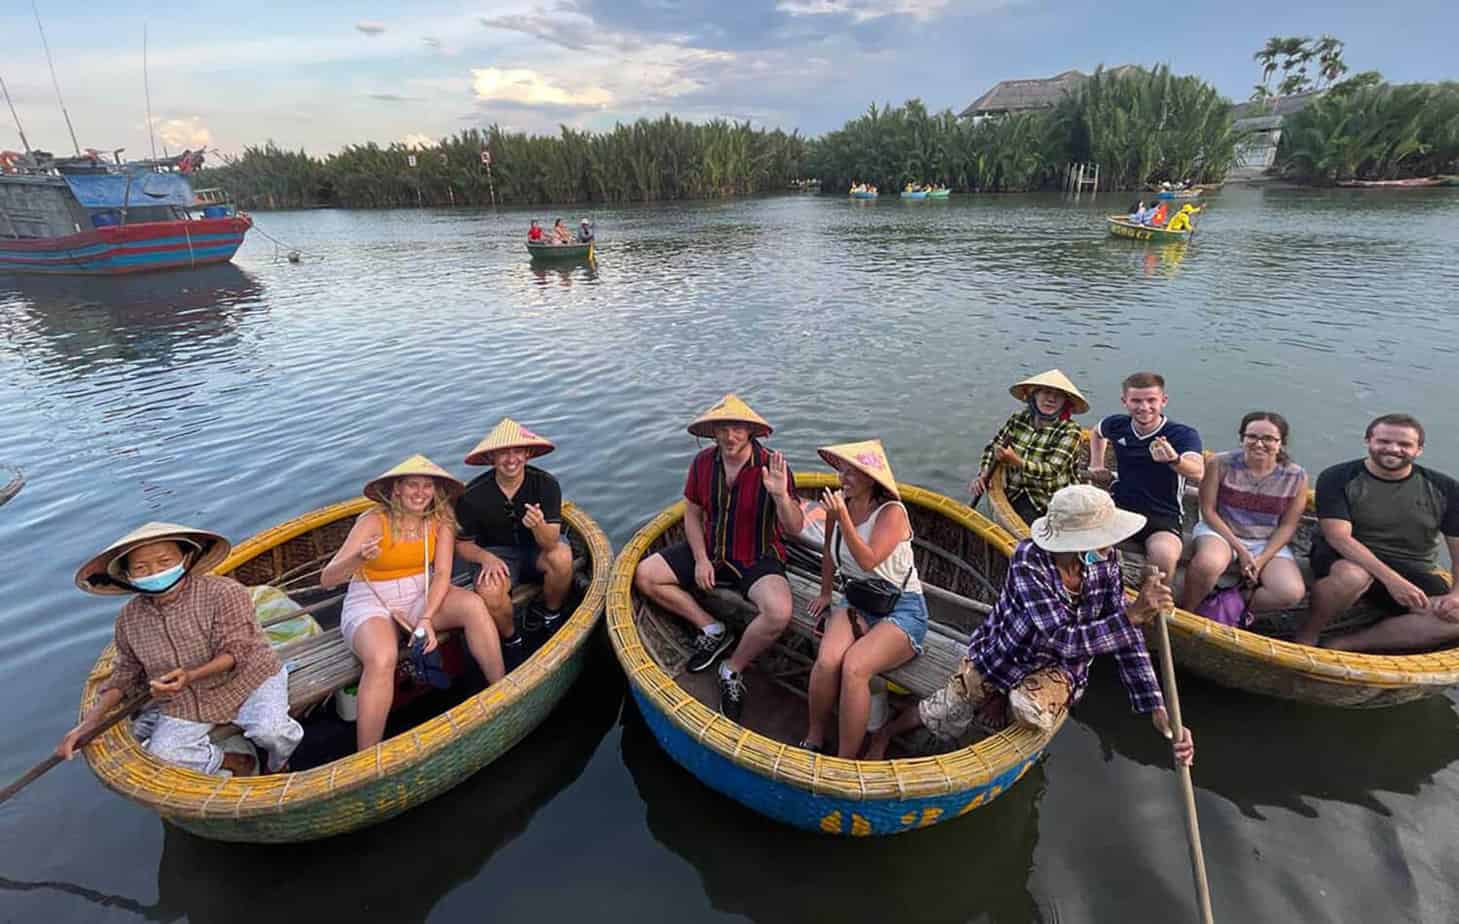 Best things to do in Hoi An - take a boat trip